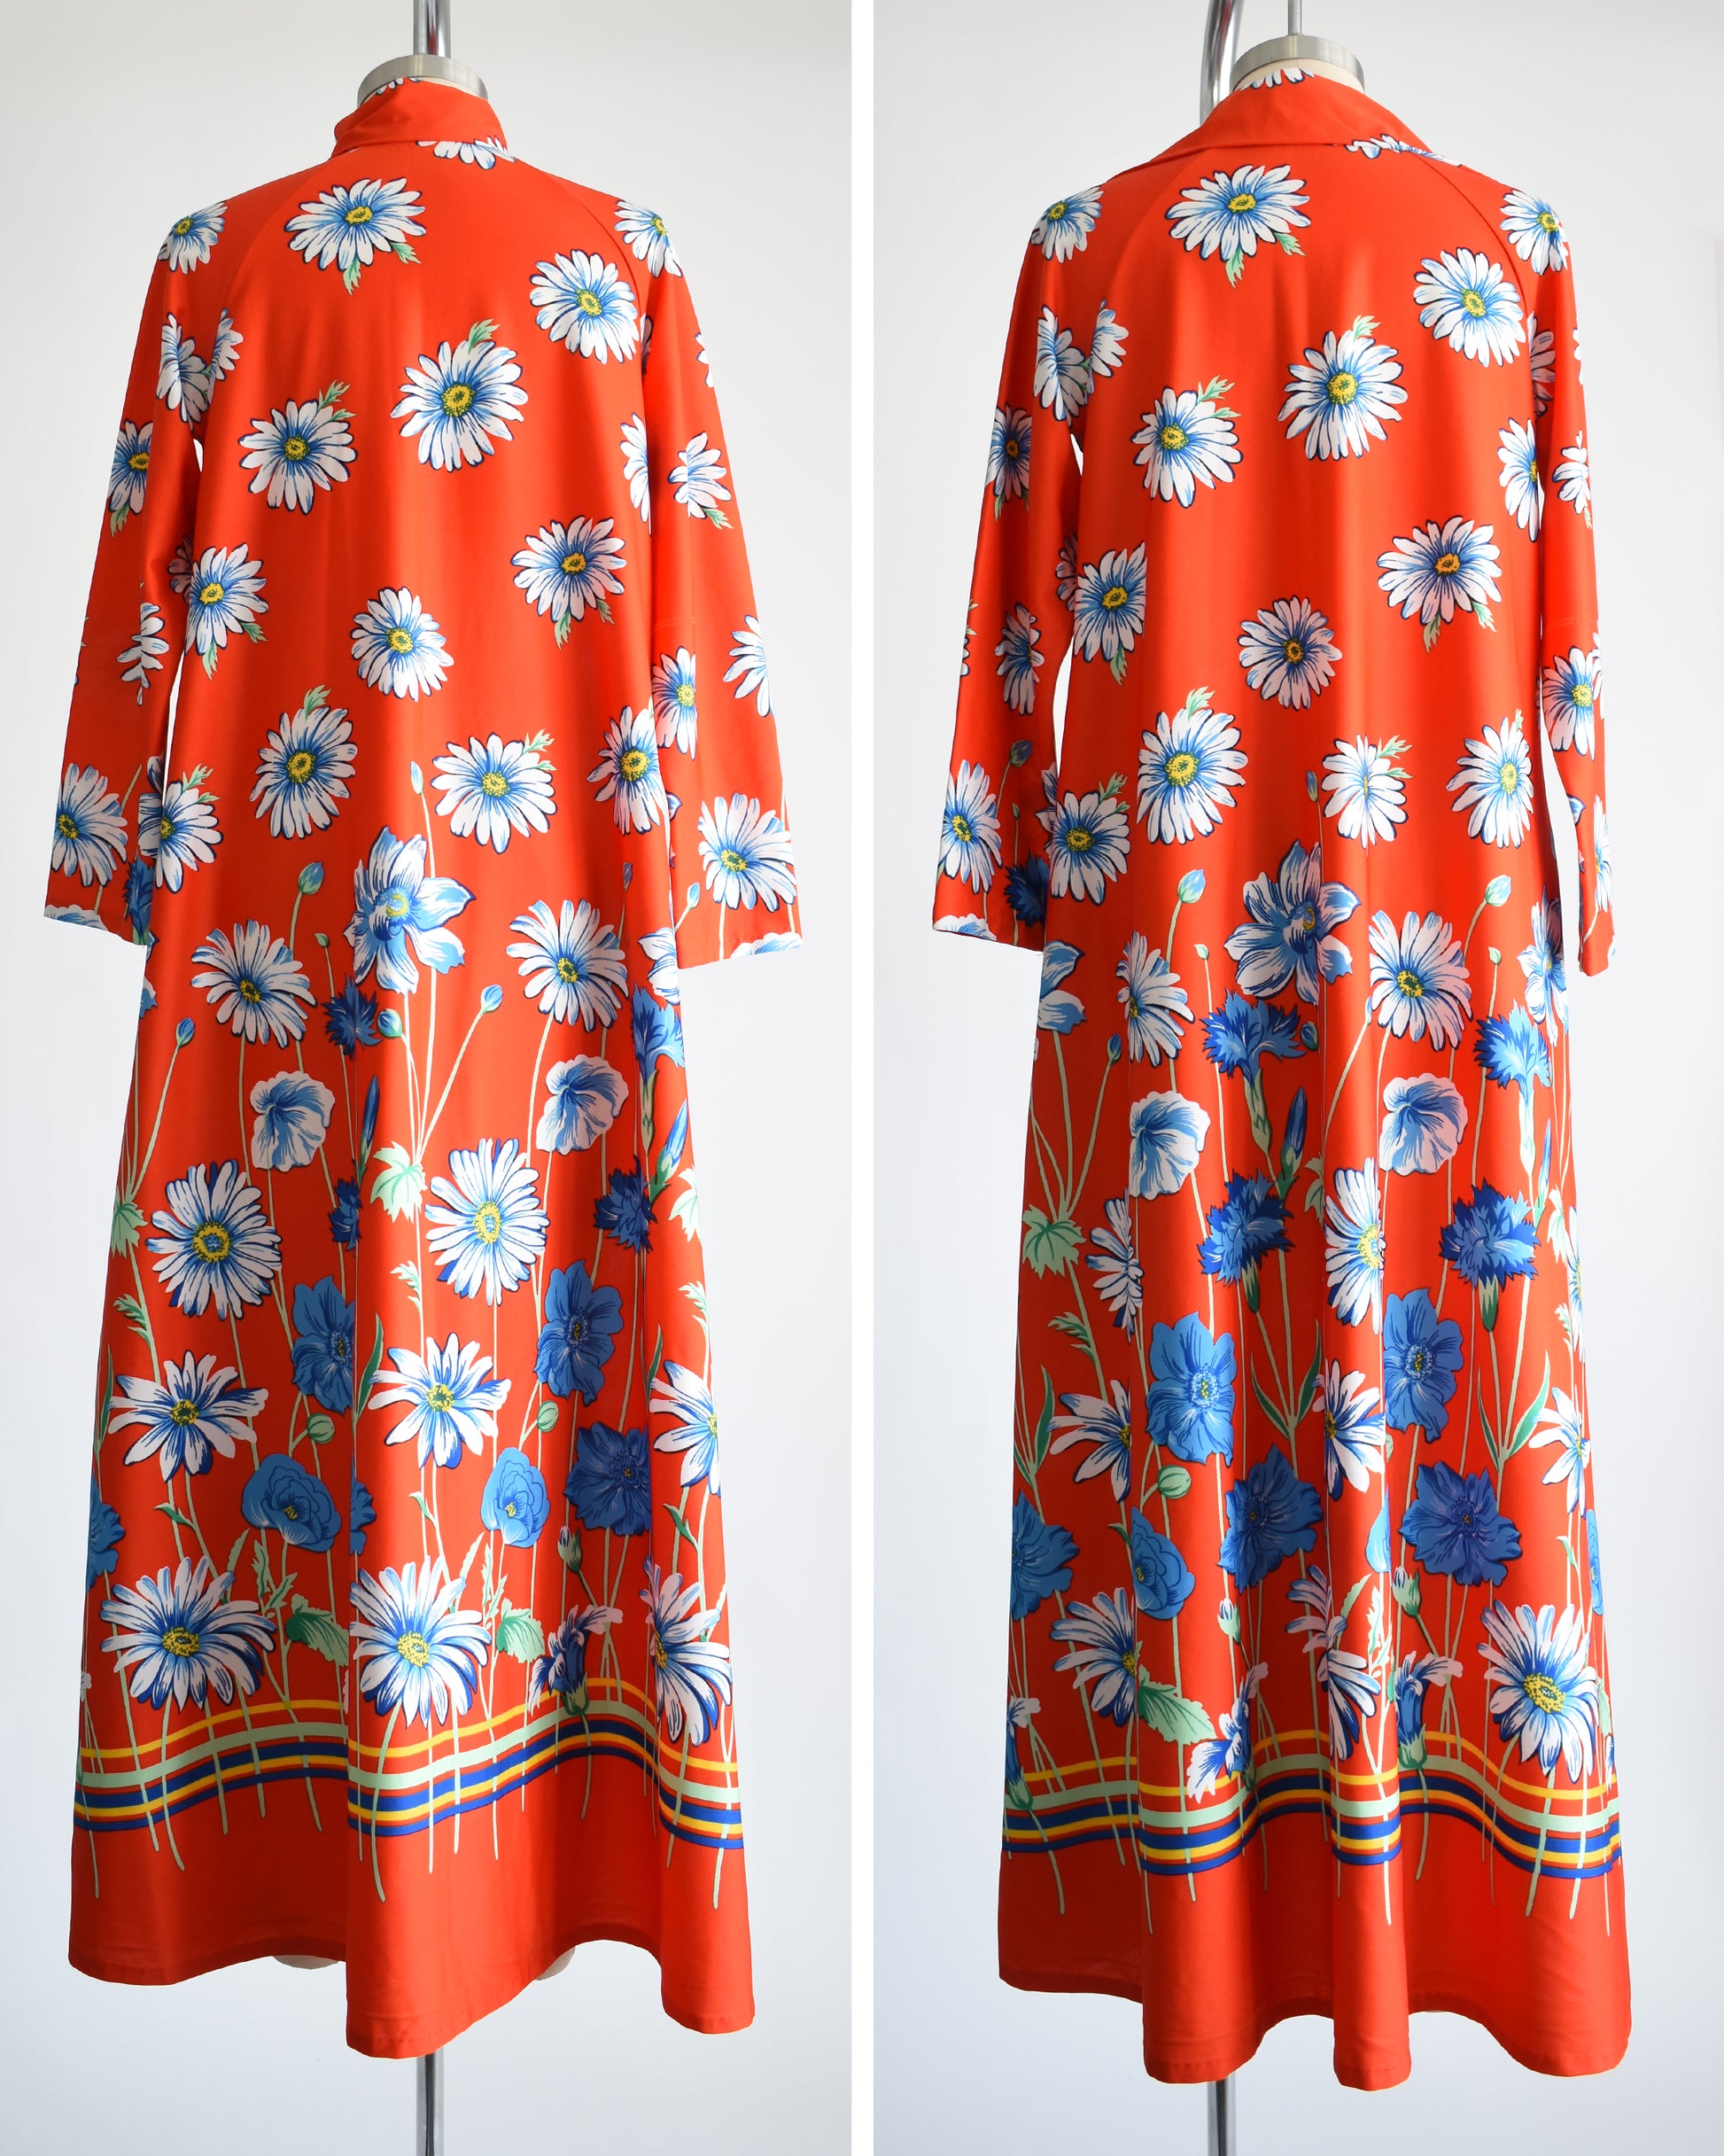 Side by side views of a vintage 1970s red floral lounge dress. The dress is zipped up all the way on the left photo